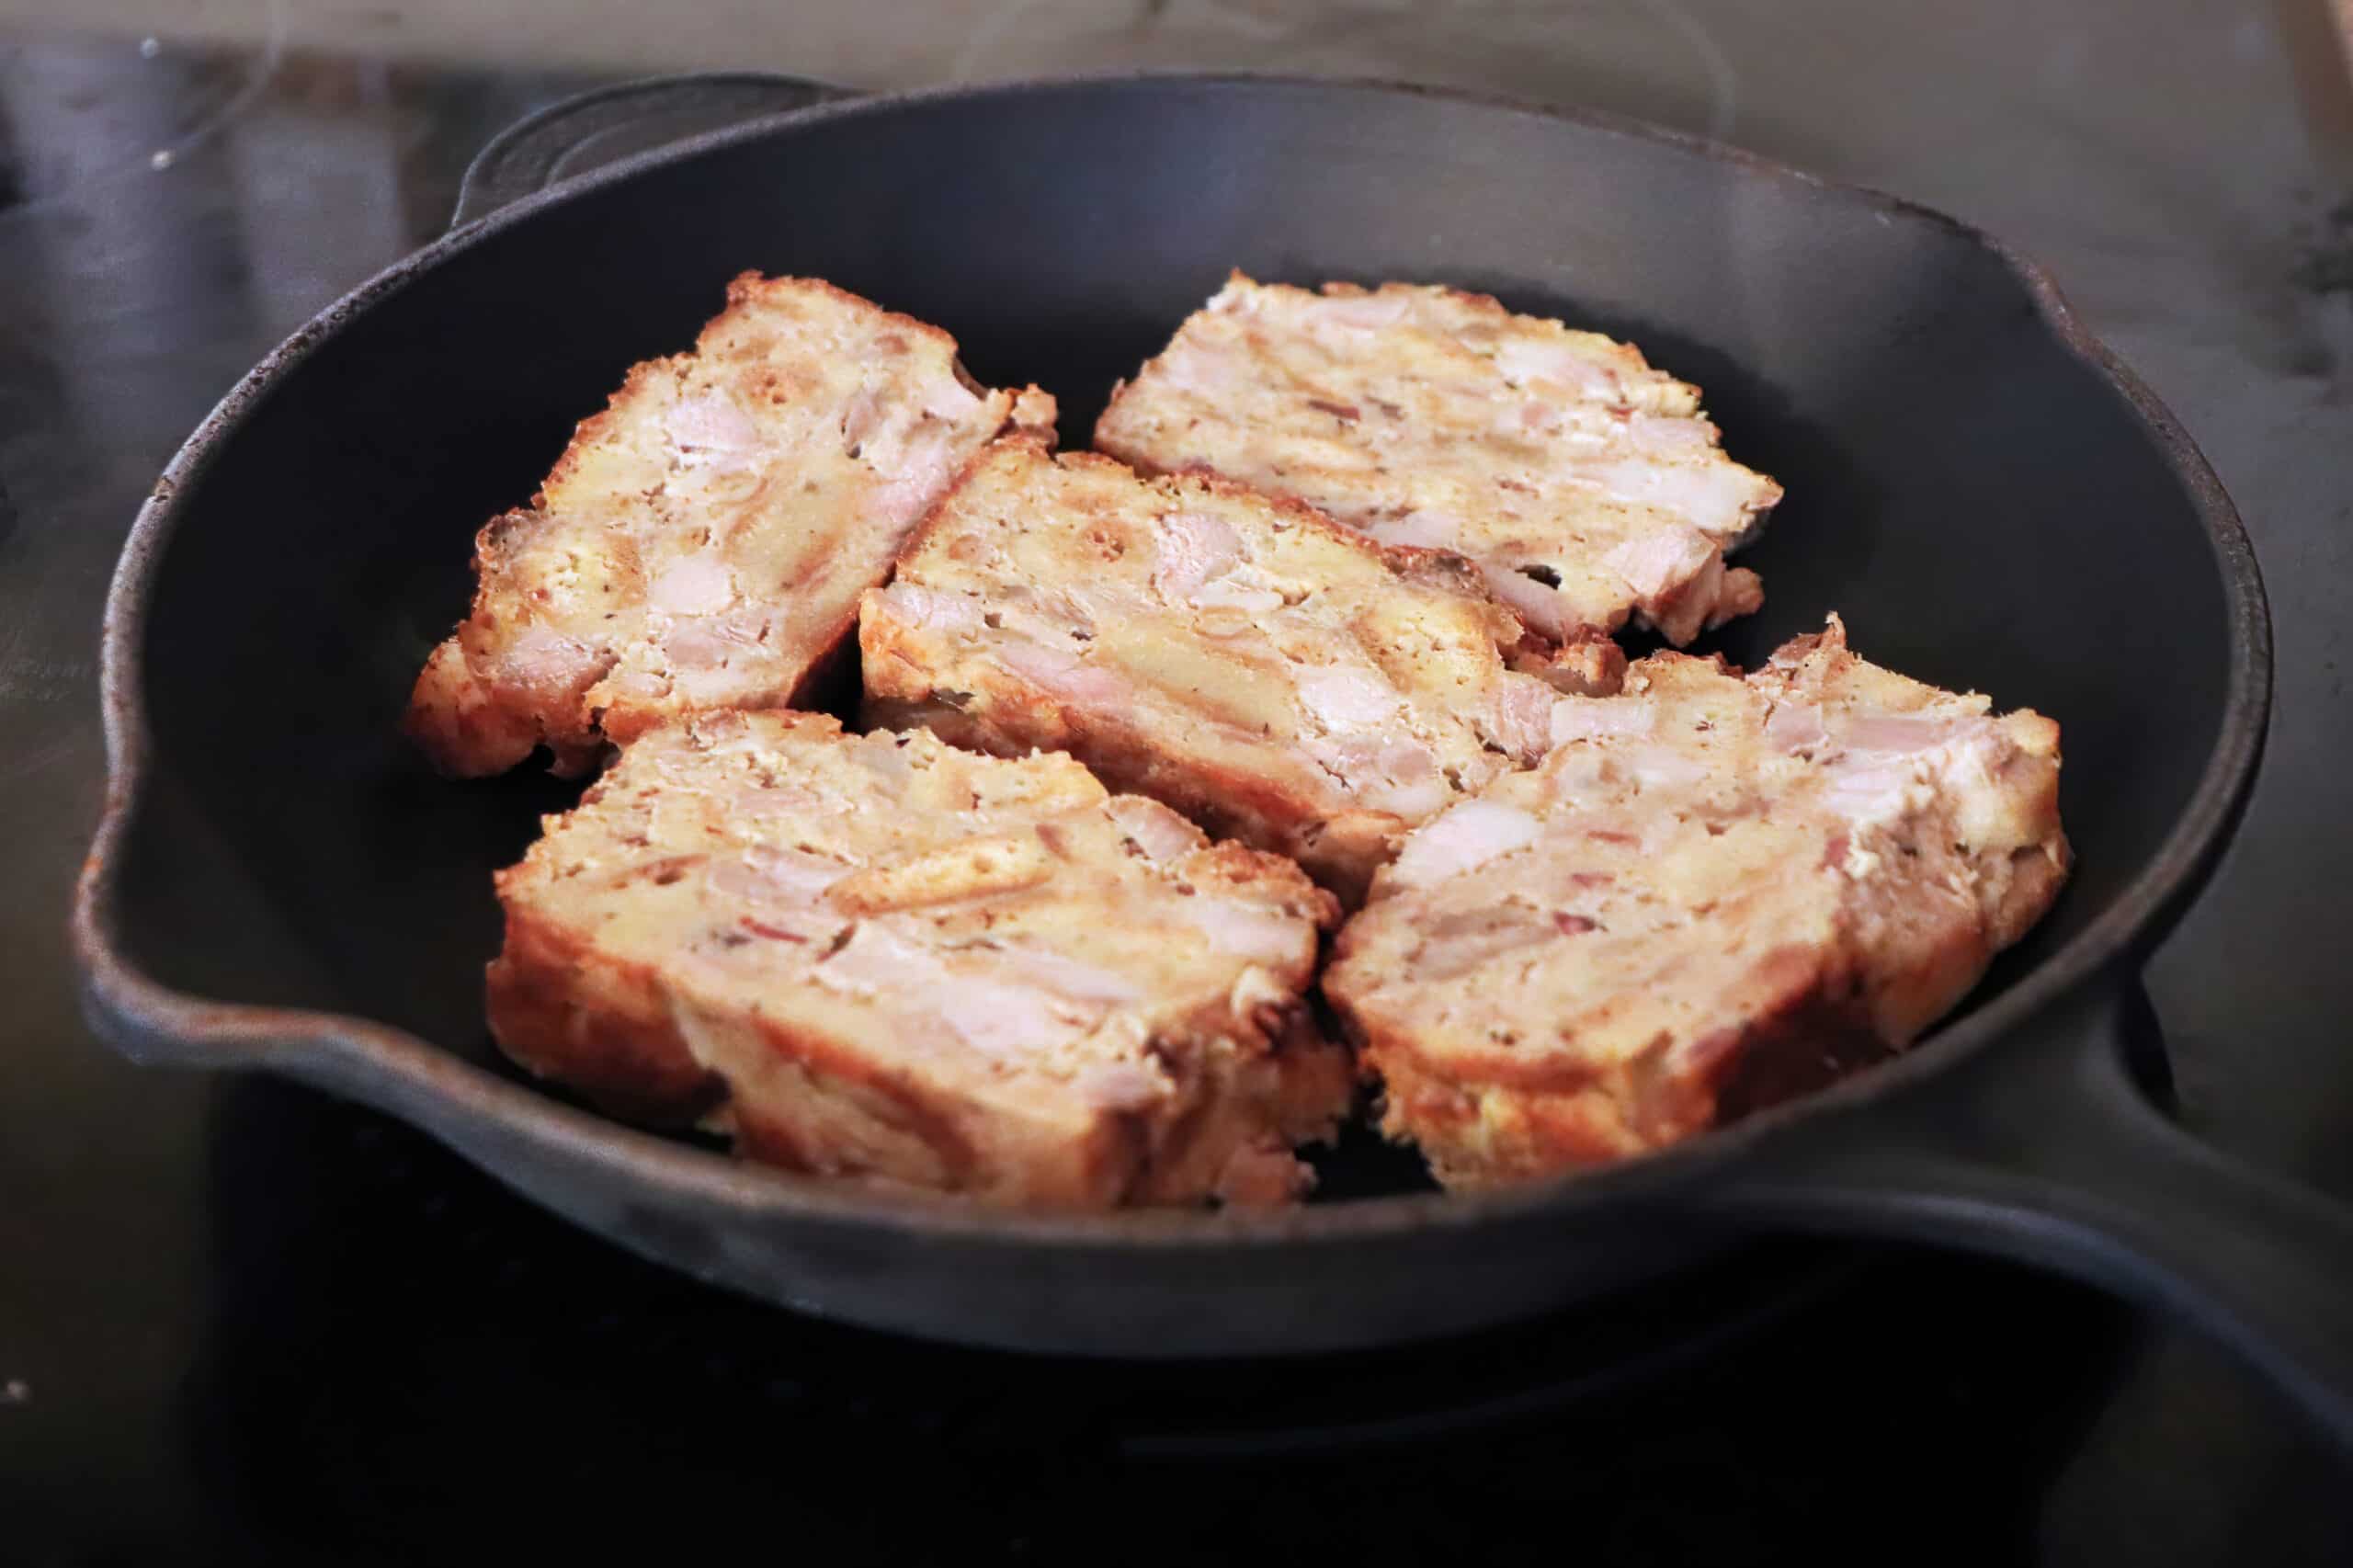 Frying scrapple slices on a cast iron pan.